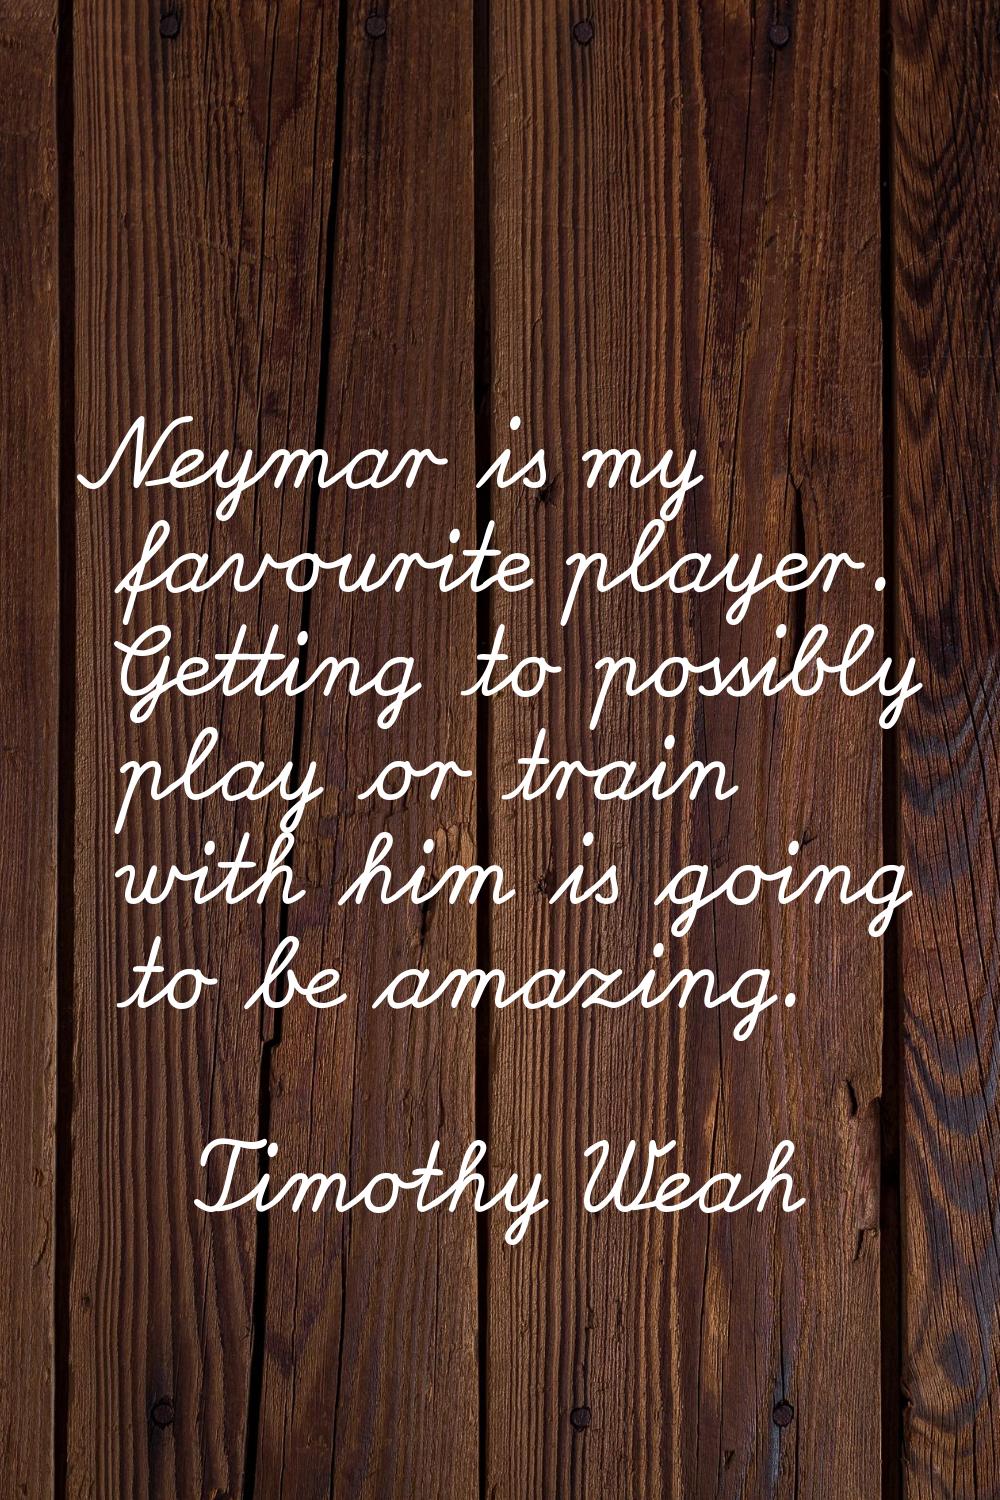 Neymar is my favourite player. Getting to possibly play or train with him is going to be amazing.